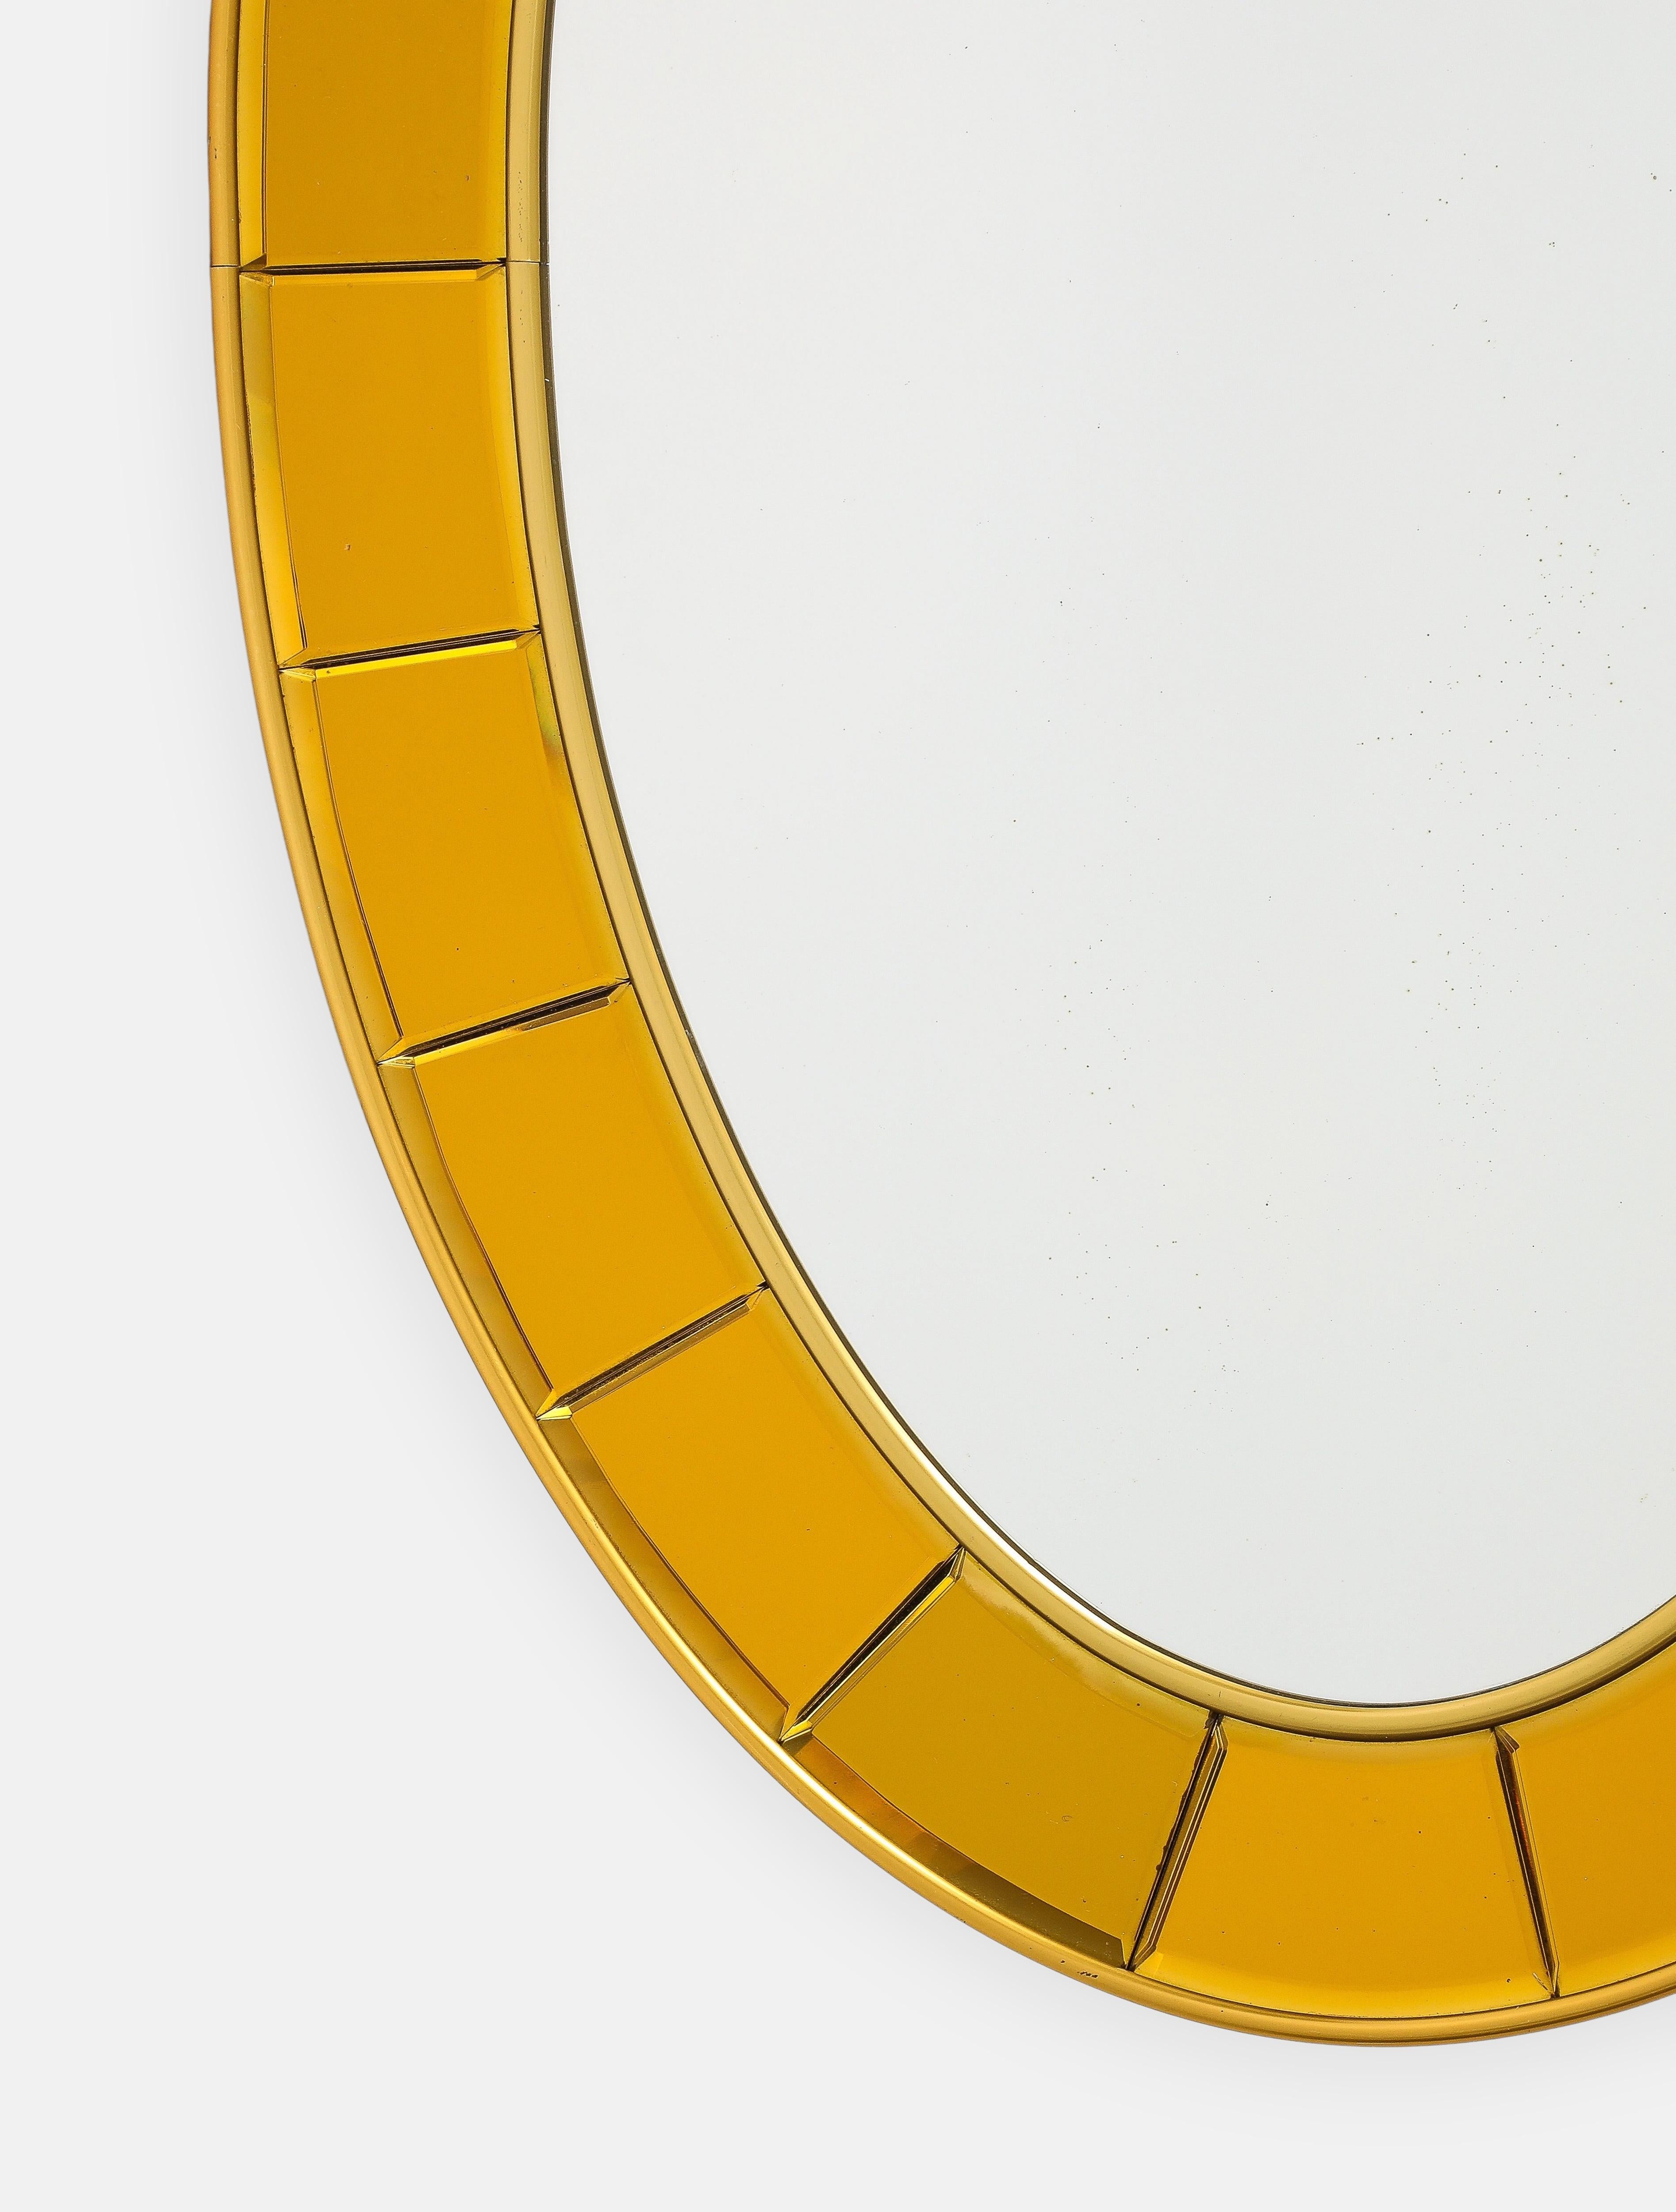 Cristal Art Oval Gold Hand-Cut Beveled Glass Mirror Model 2727, 1950s For Sale 3